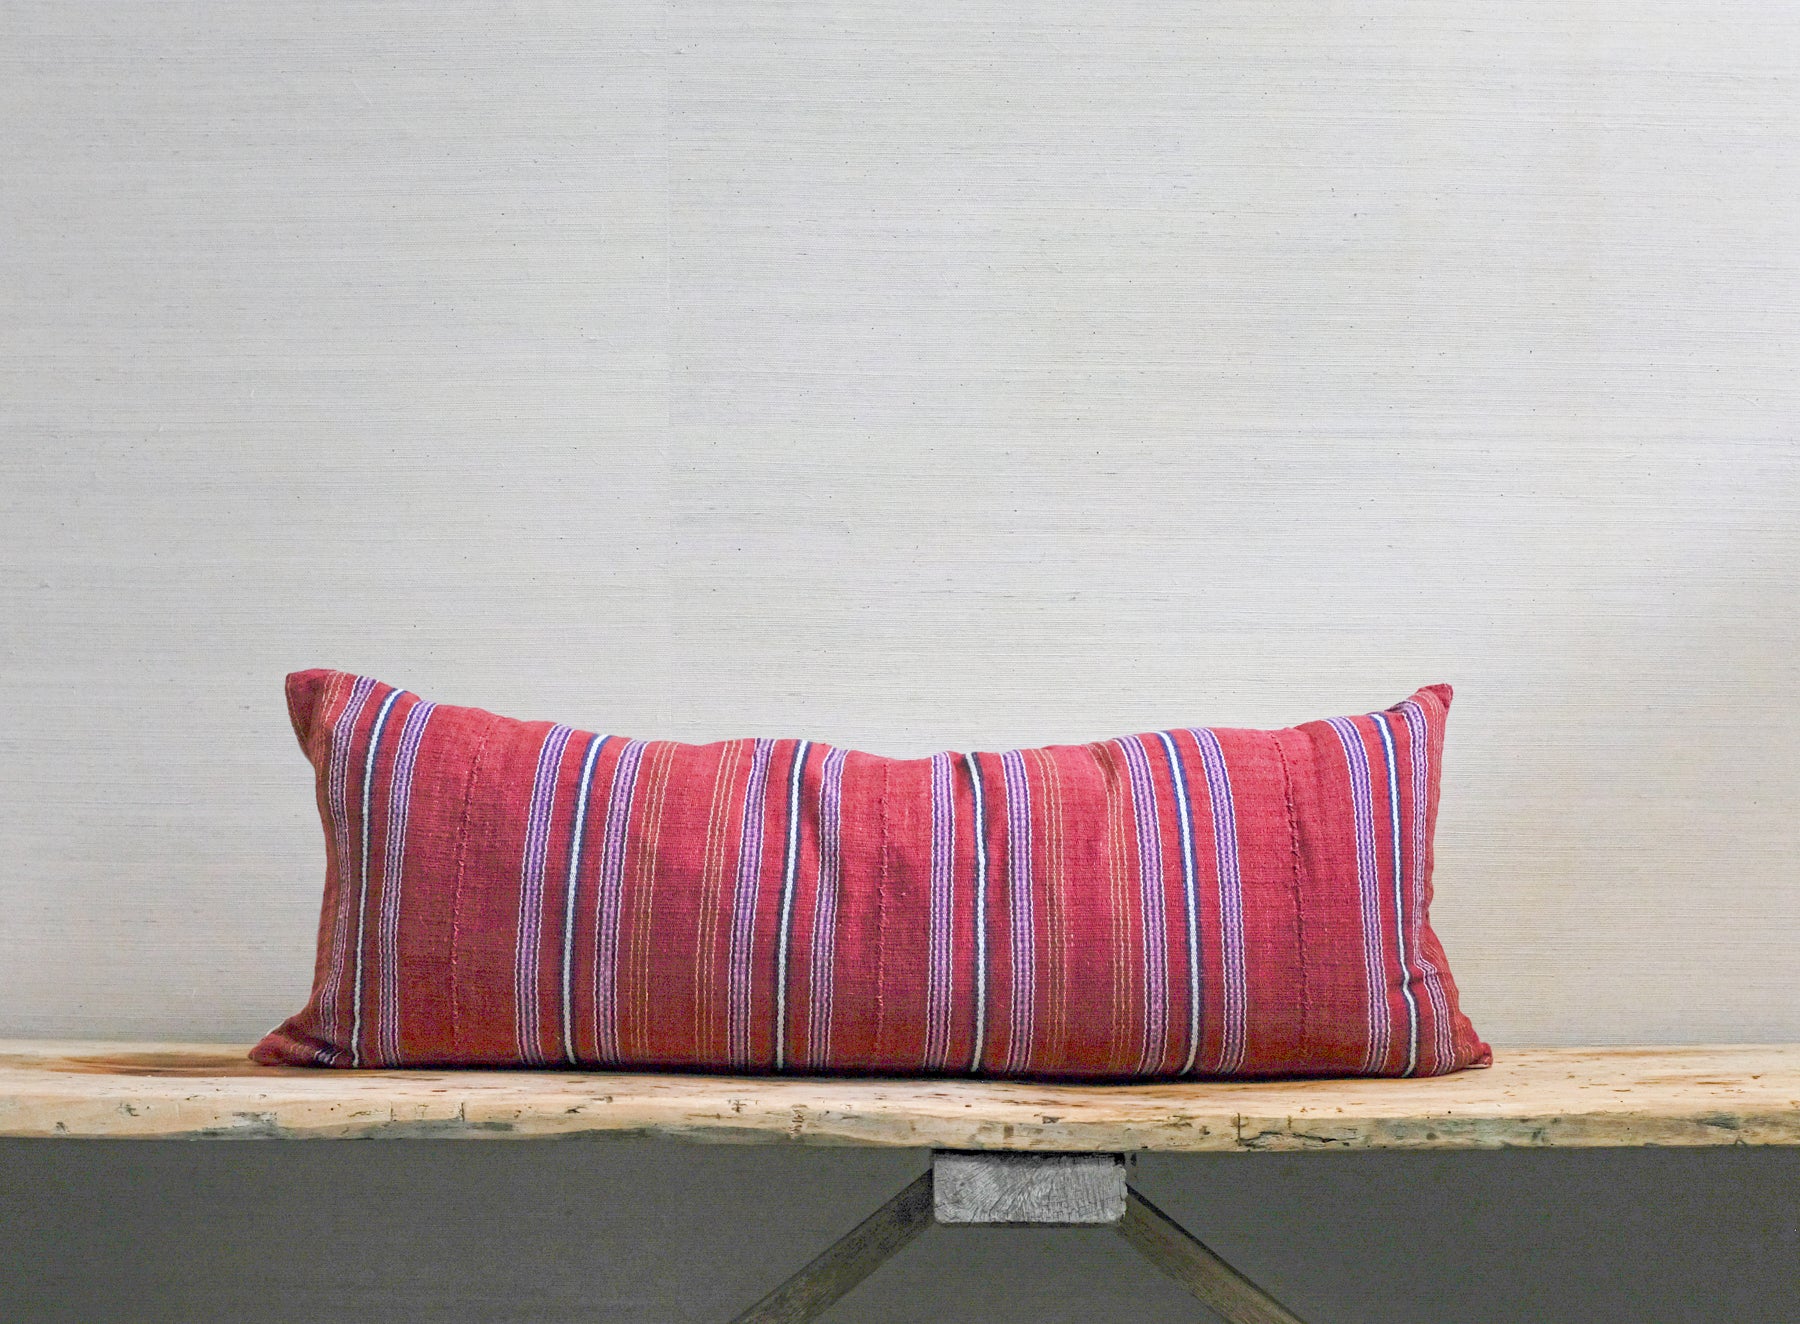 mostly red striped pillow, backstap loomed textile on front